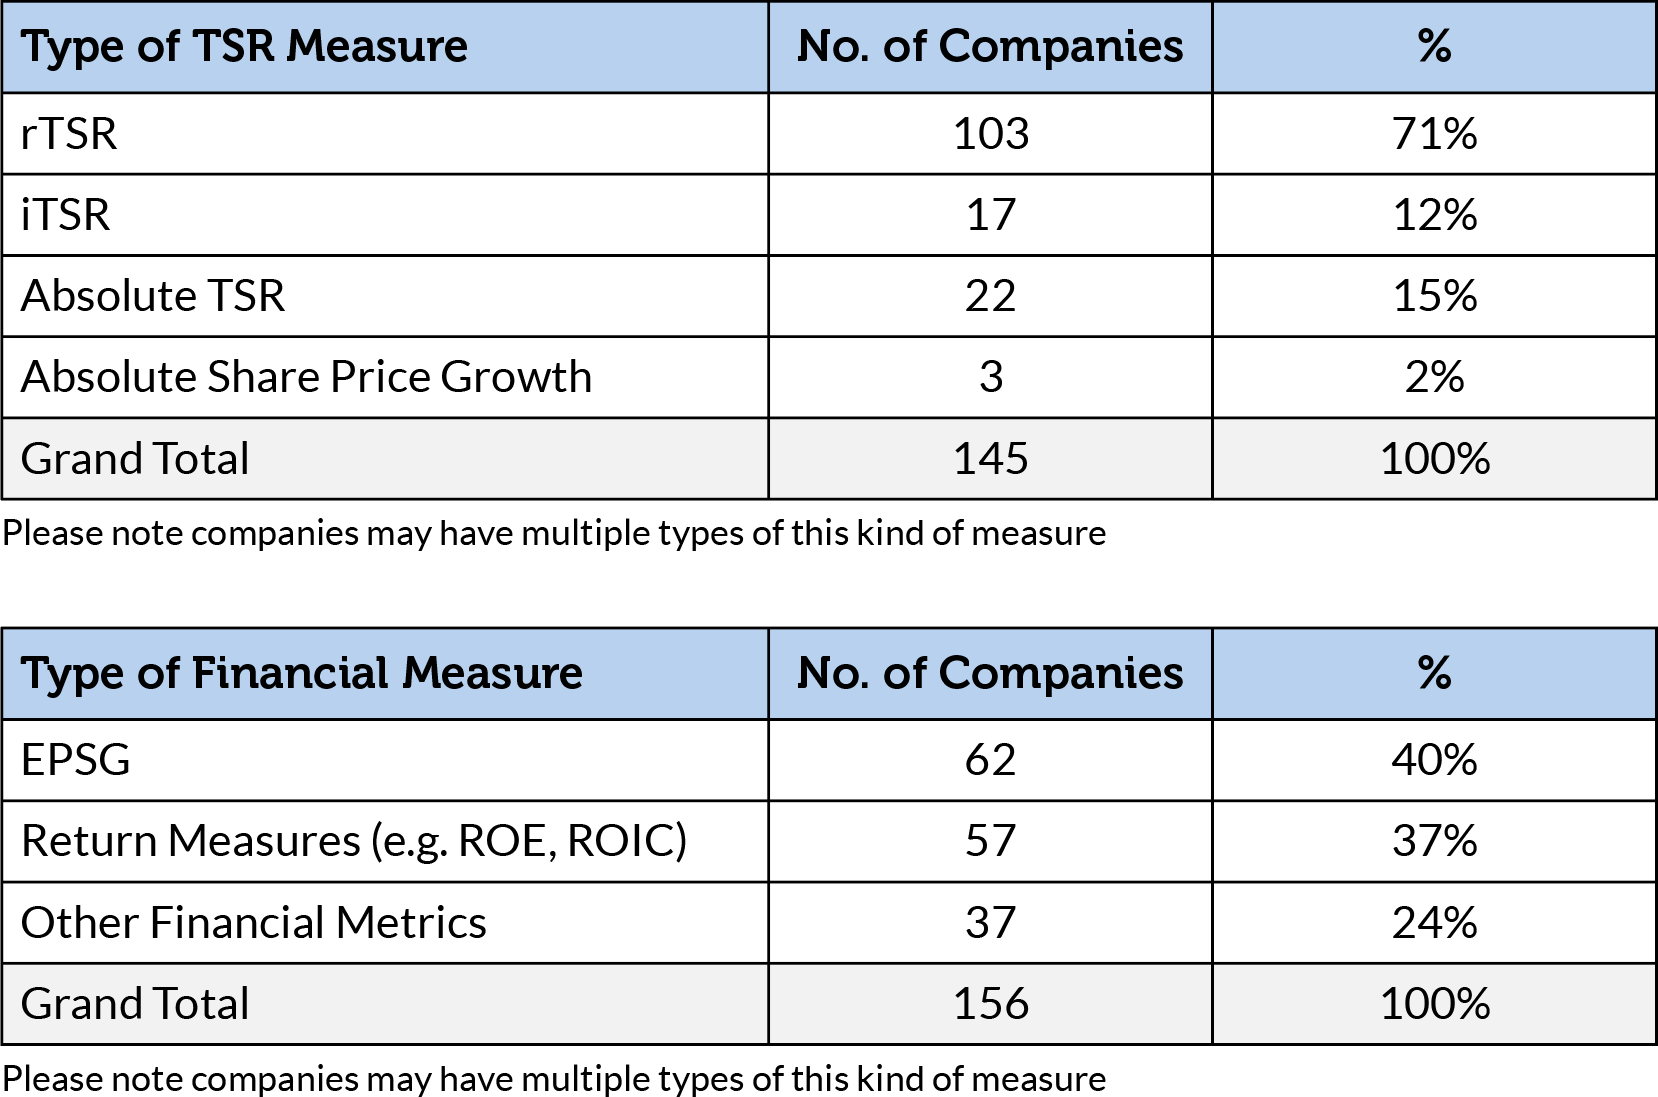 Types of TSR measure and Types of financial measure